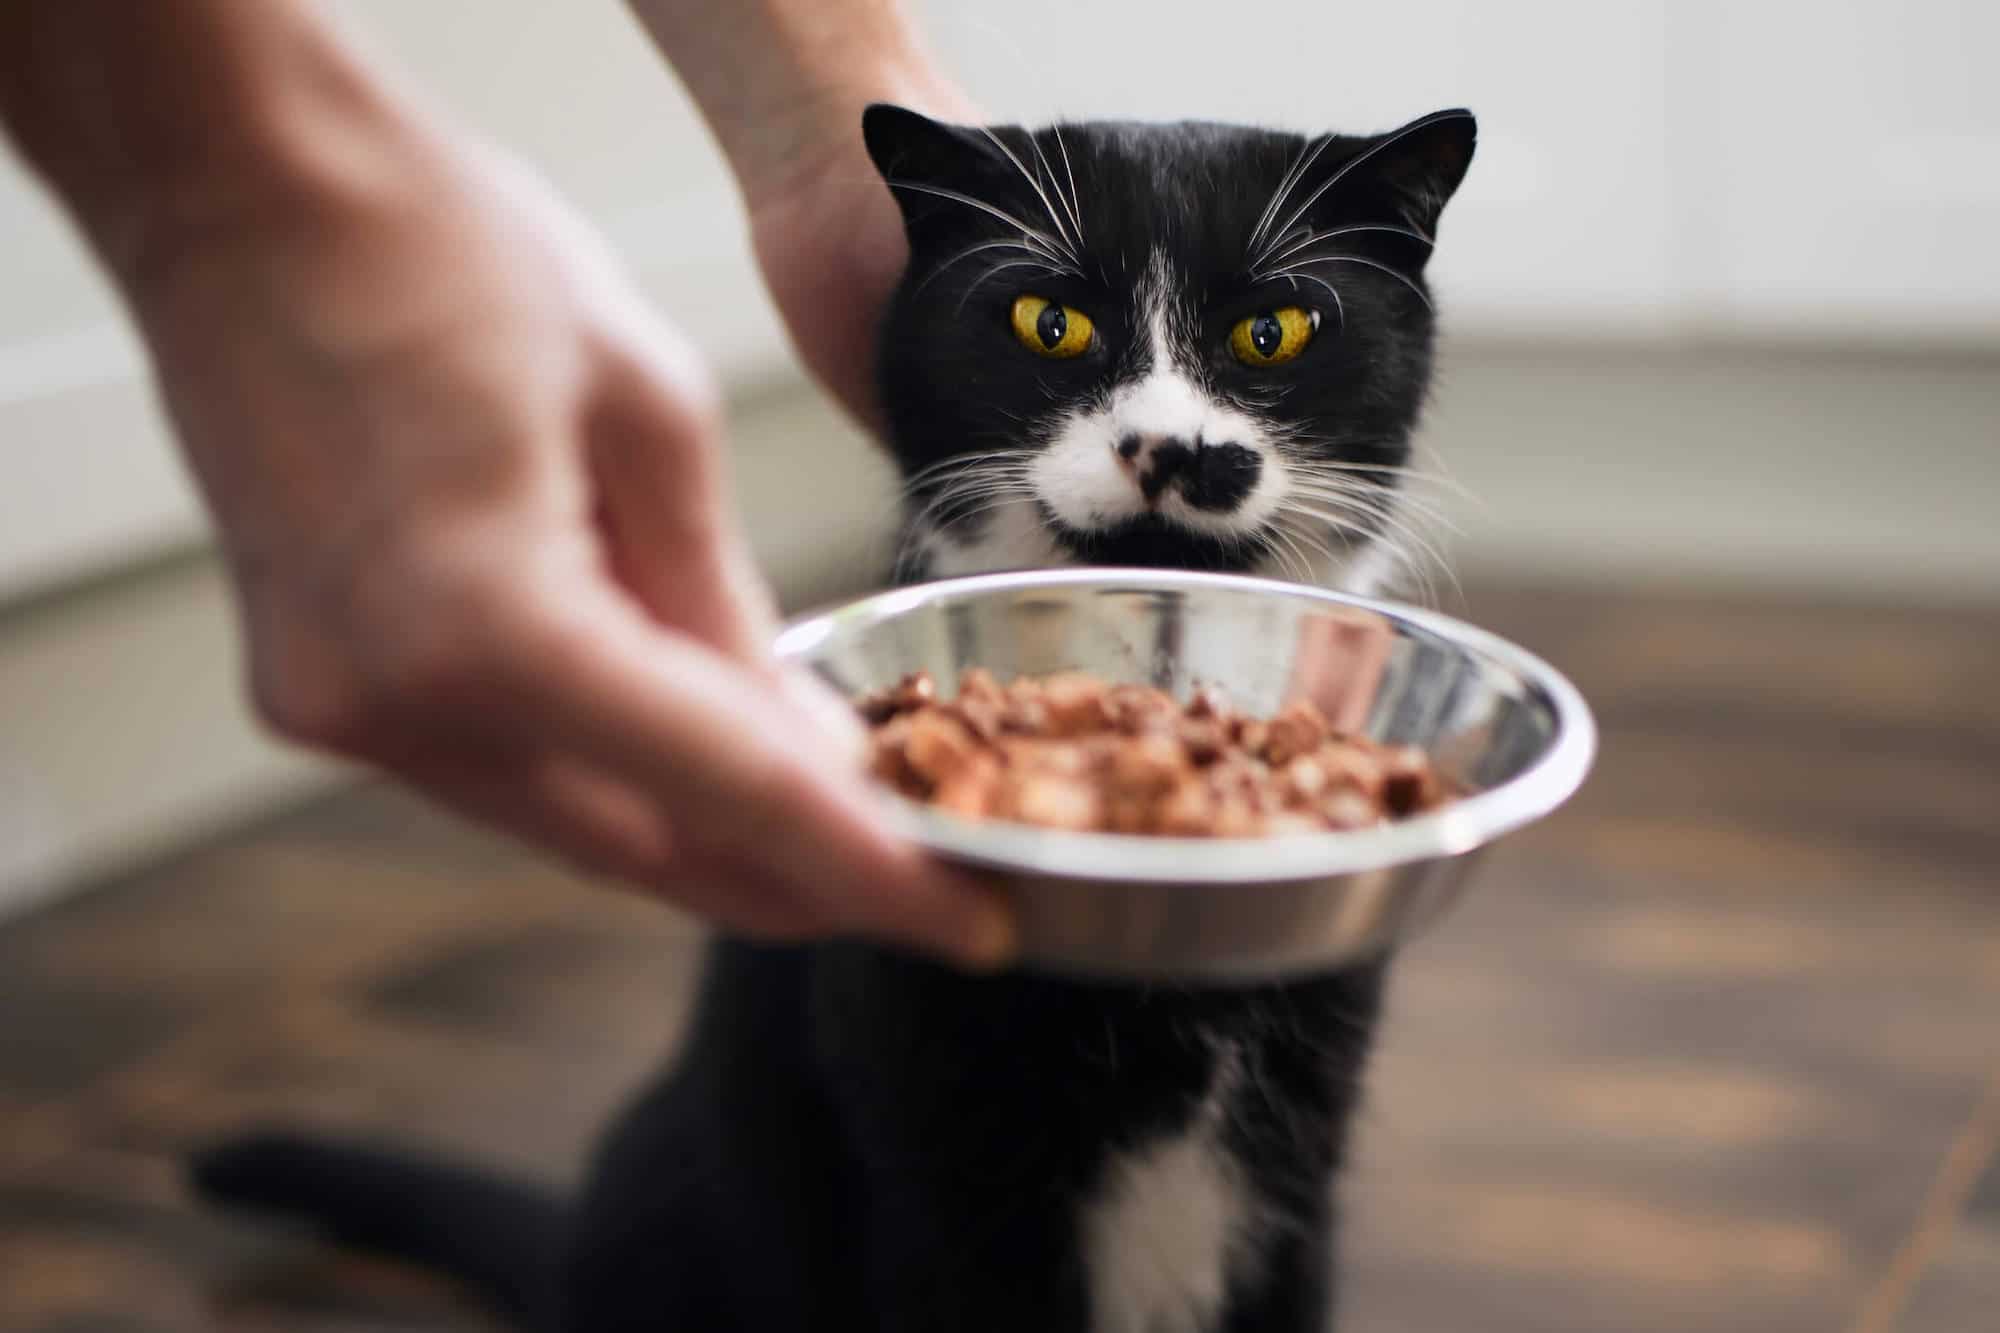 Pet owner putting a bowl of food in front of his black and white cat